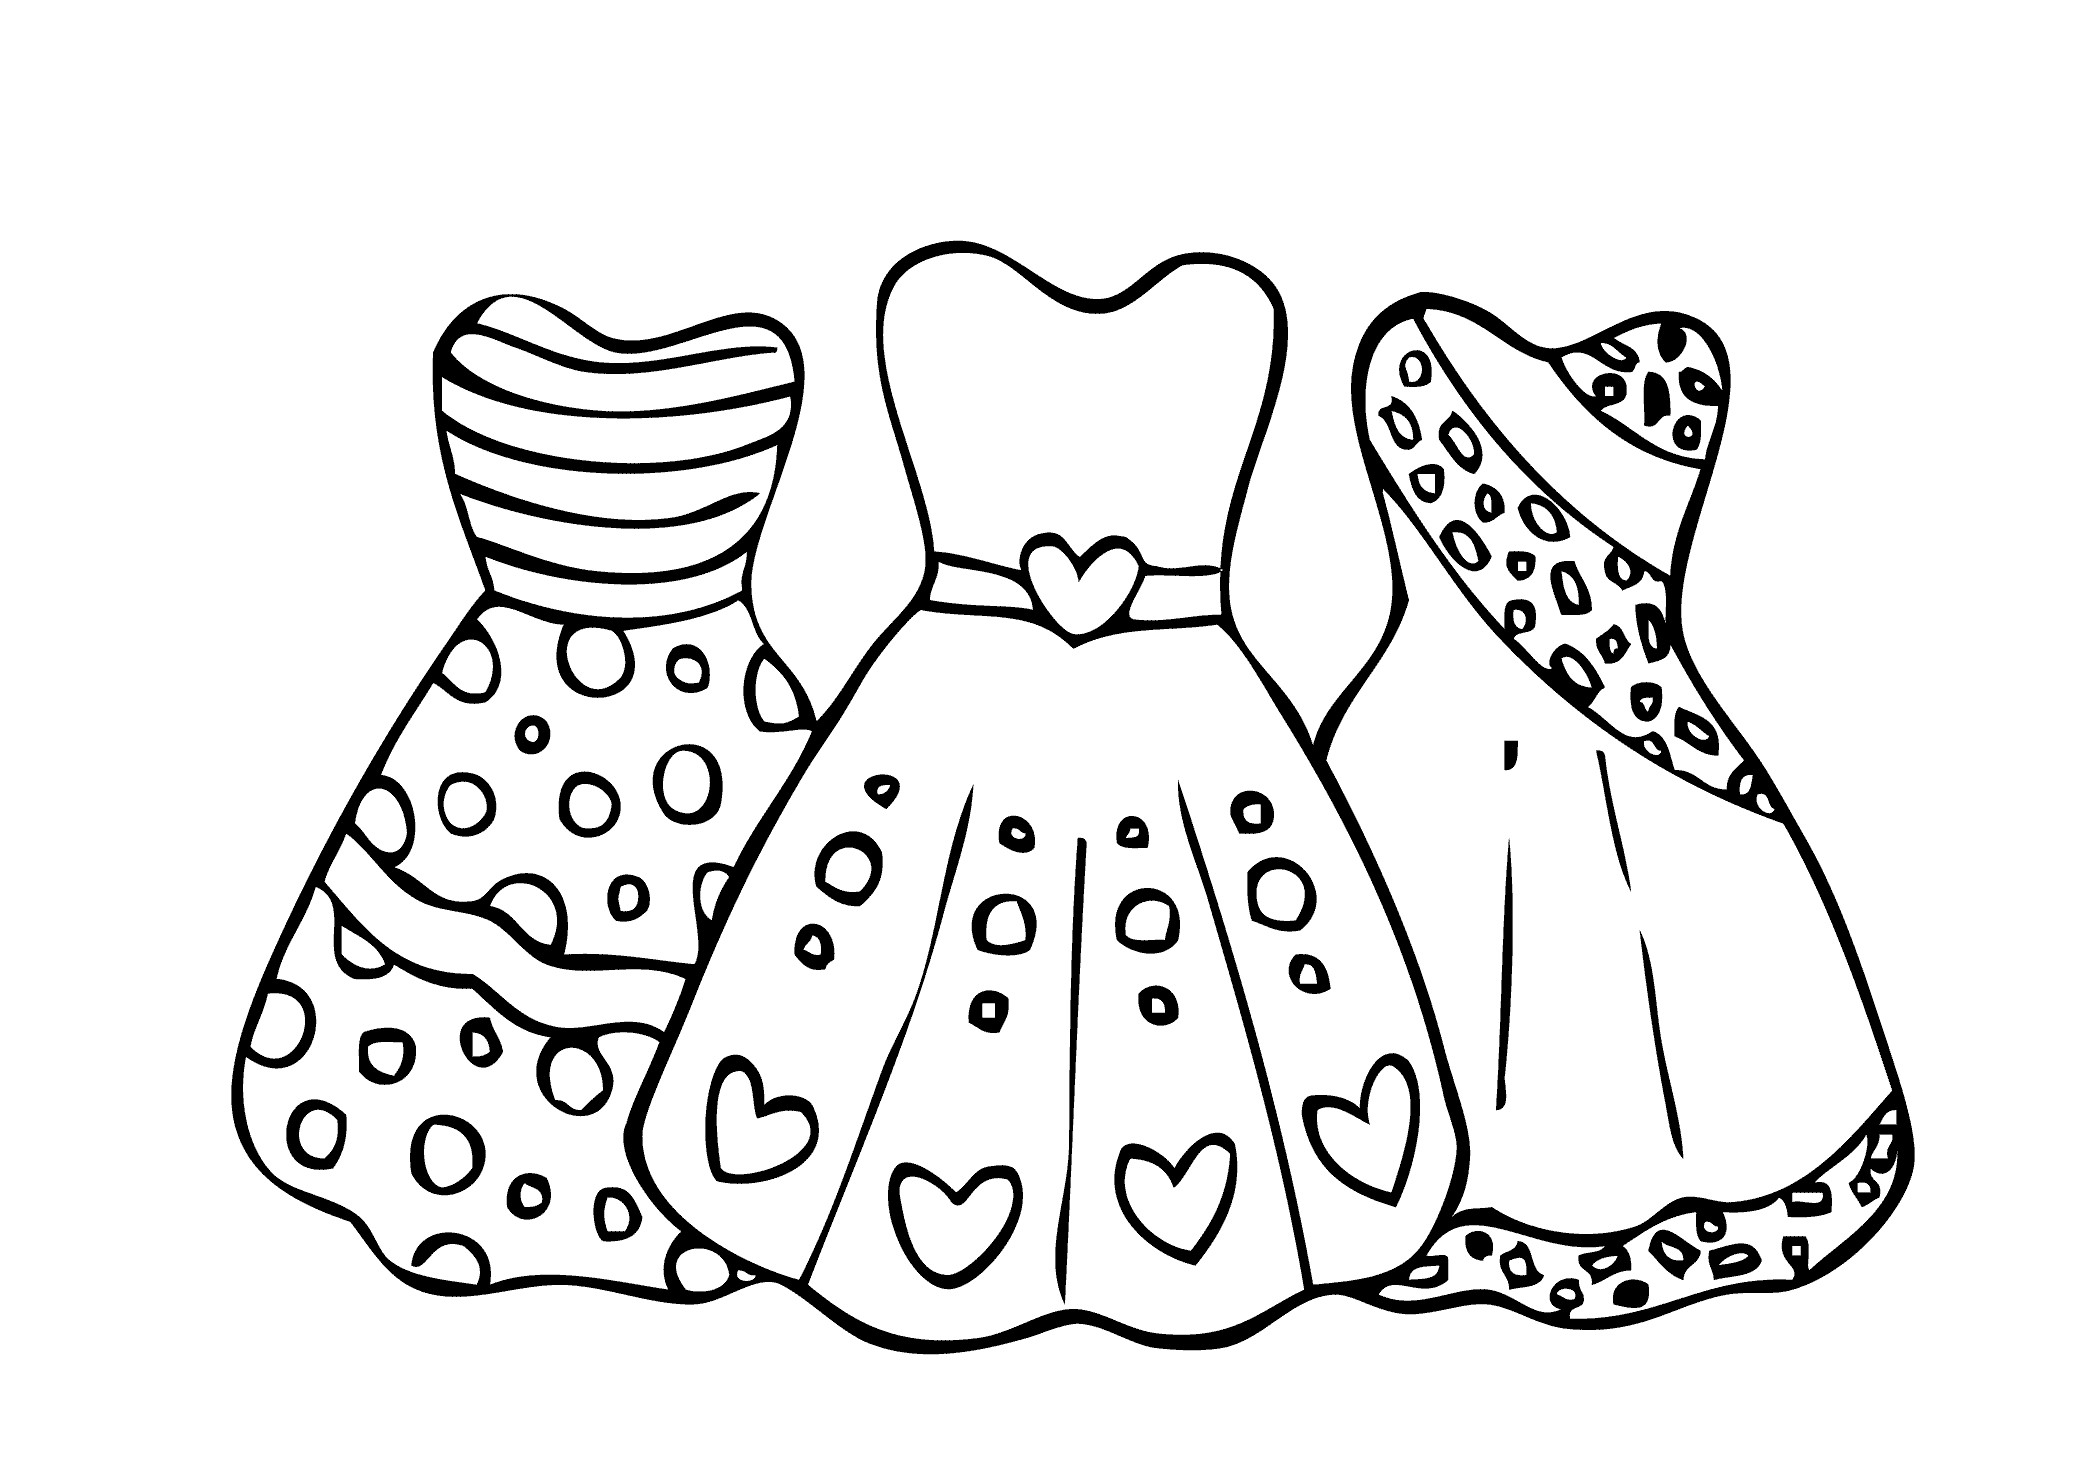 Basic Coloring Pages For Girls
 Easy Coloring Pages coloringsuite